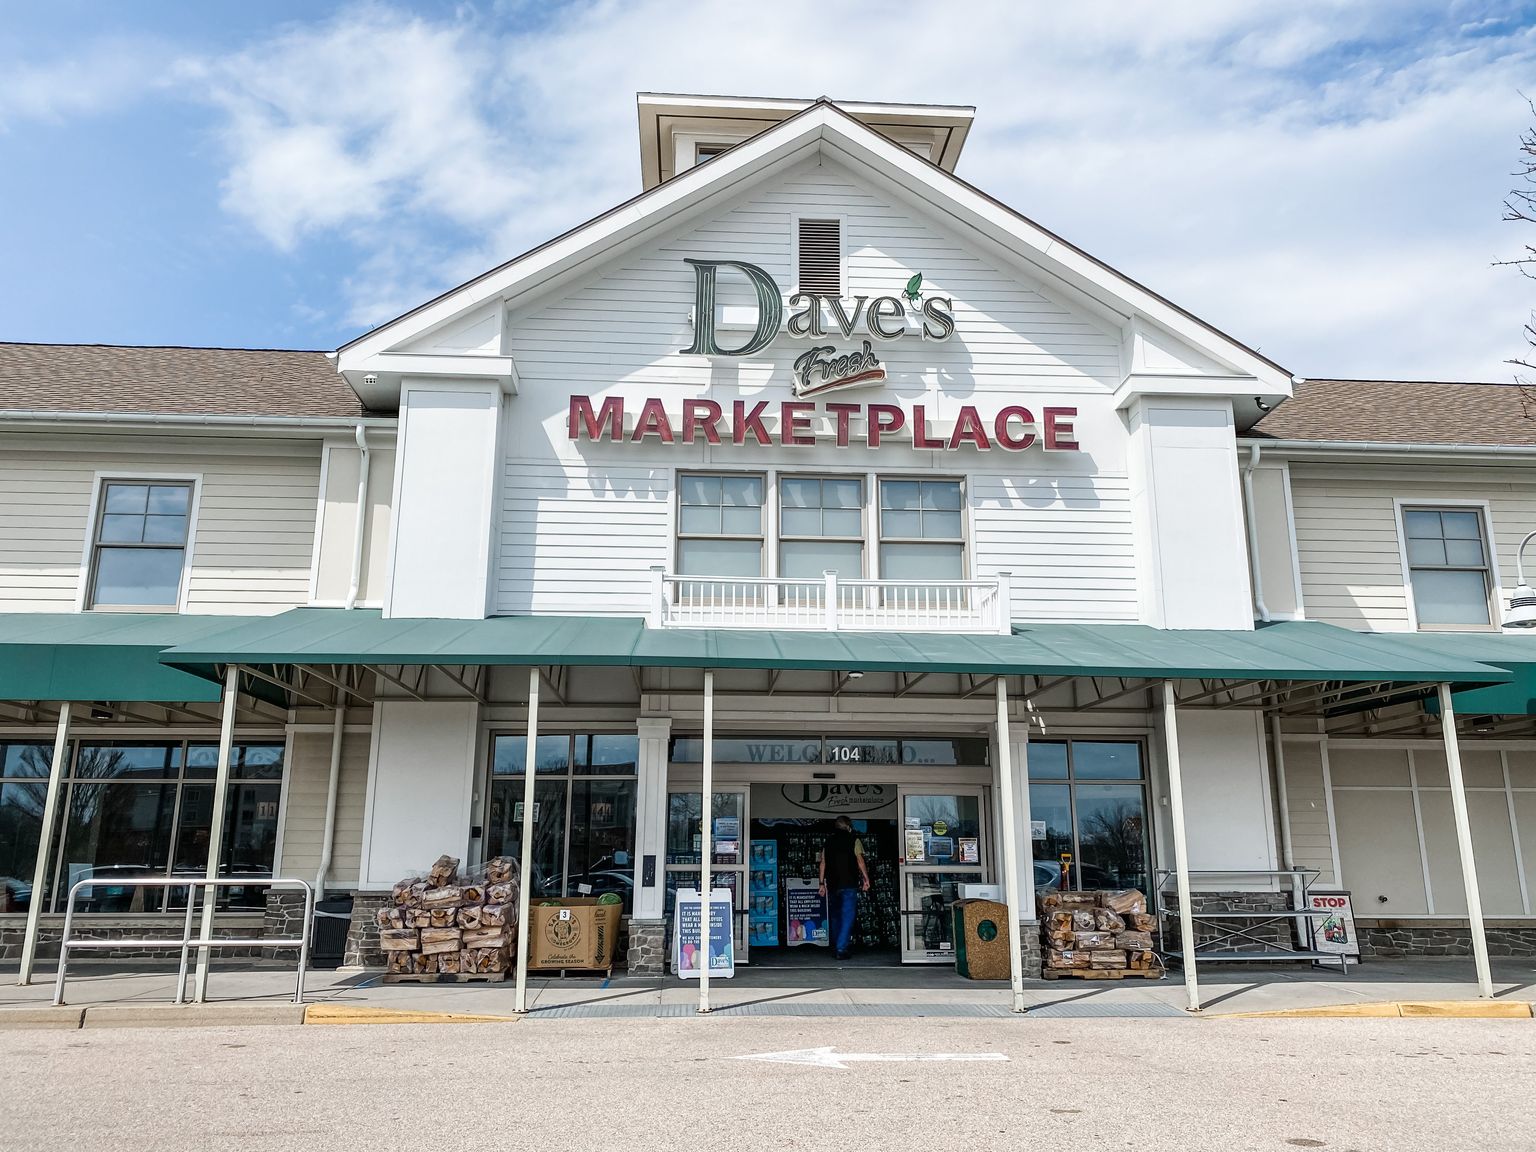 shops at quonset point dave's marketplace exterior